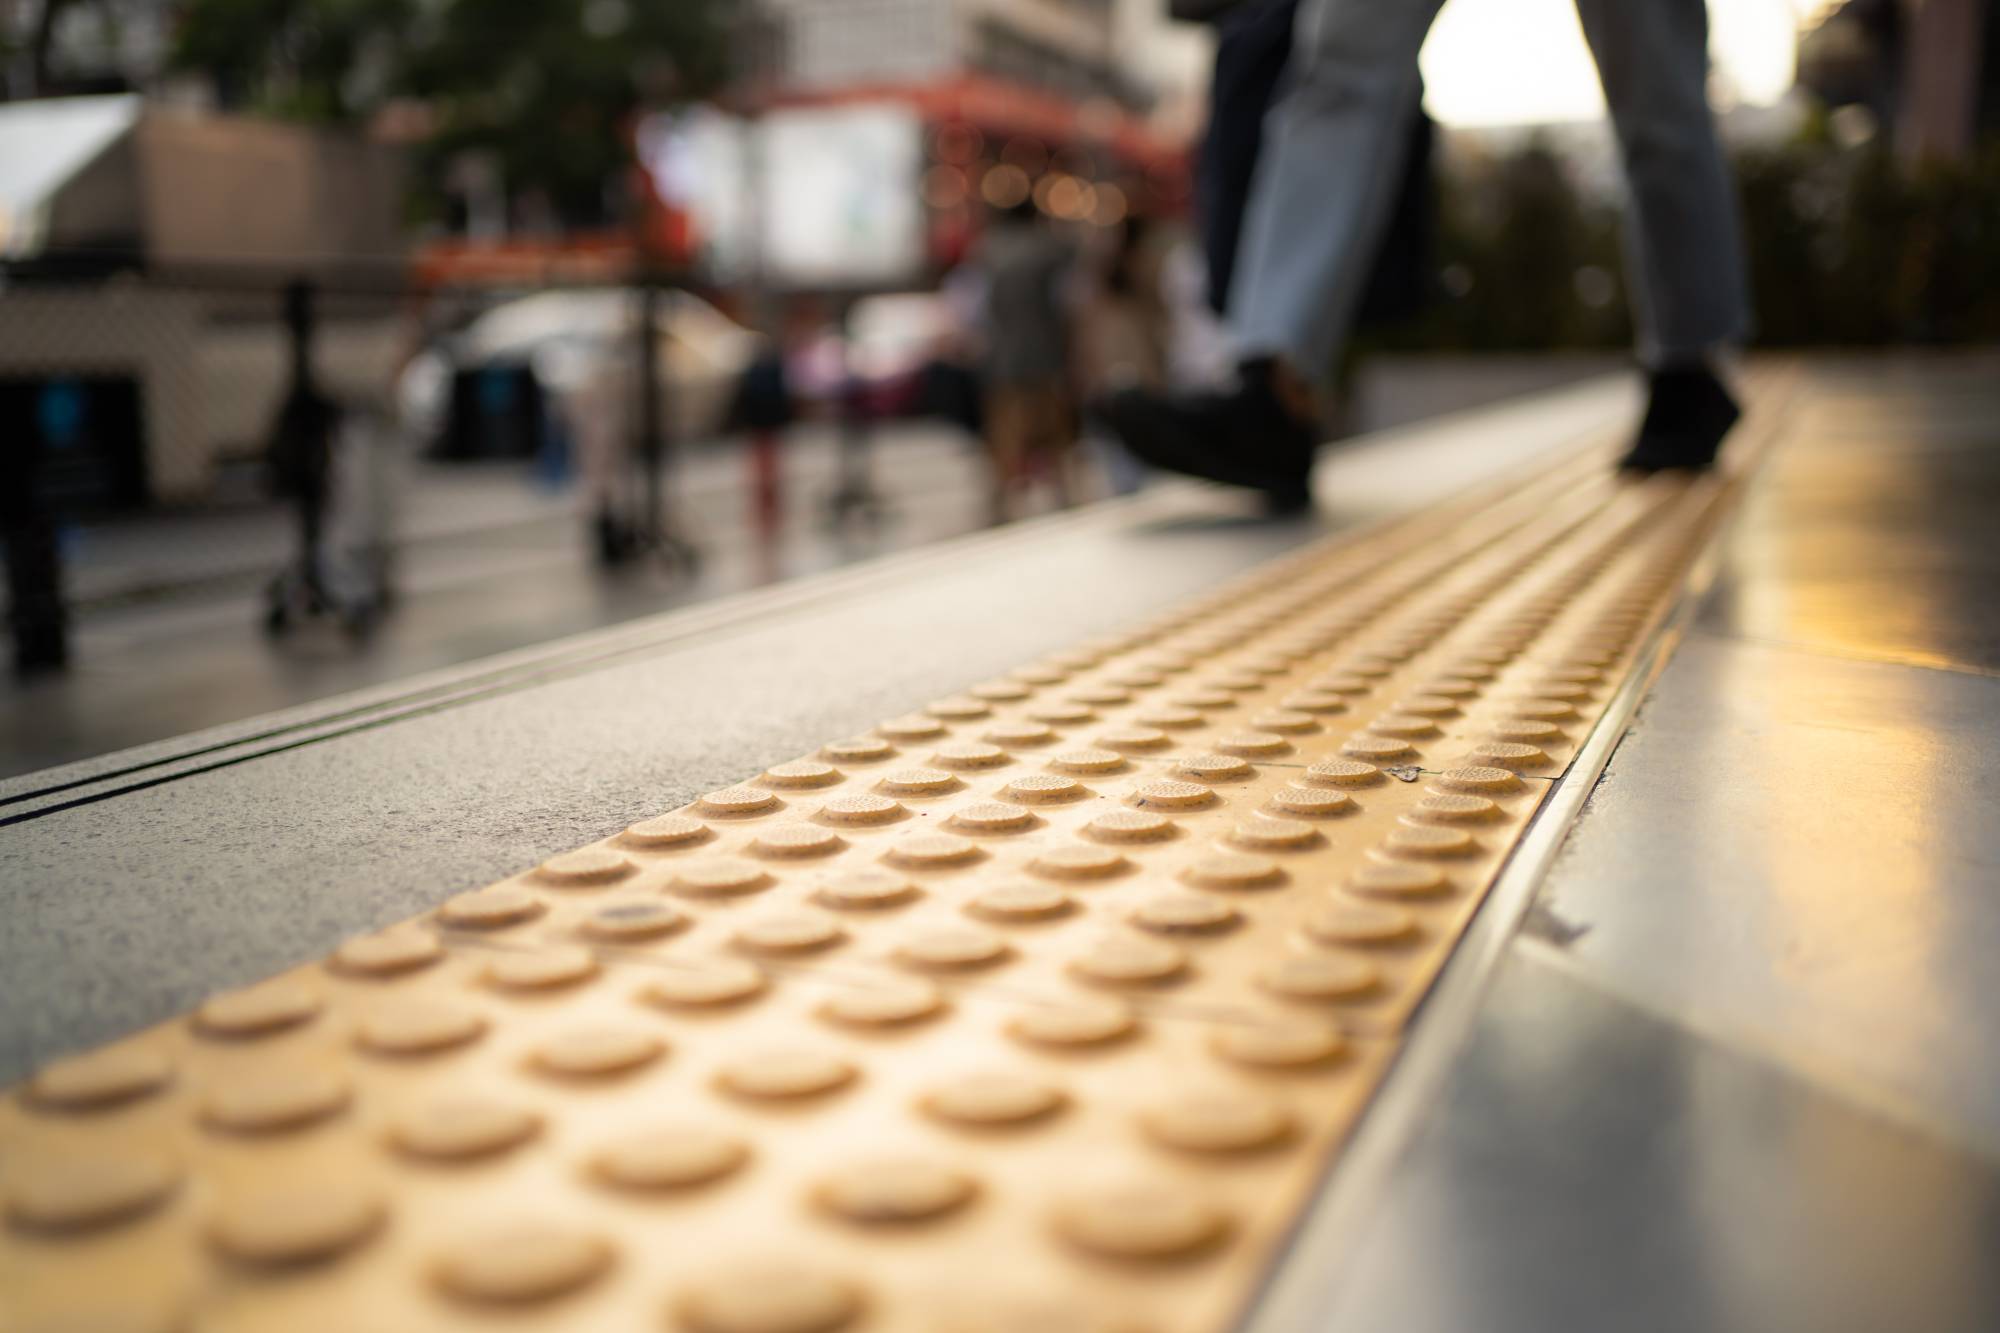 Tactile paving allows people with visual impairments to navigate Japan's congested footpaths and train stations. | GETTY IMAGES